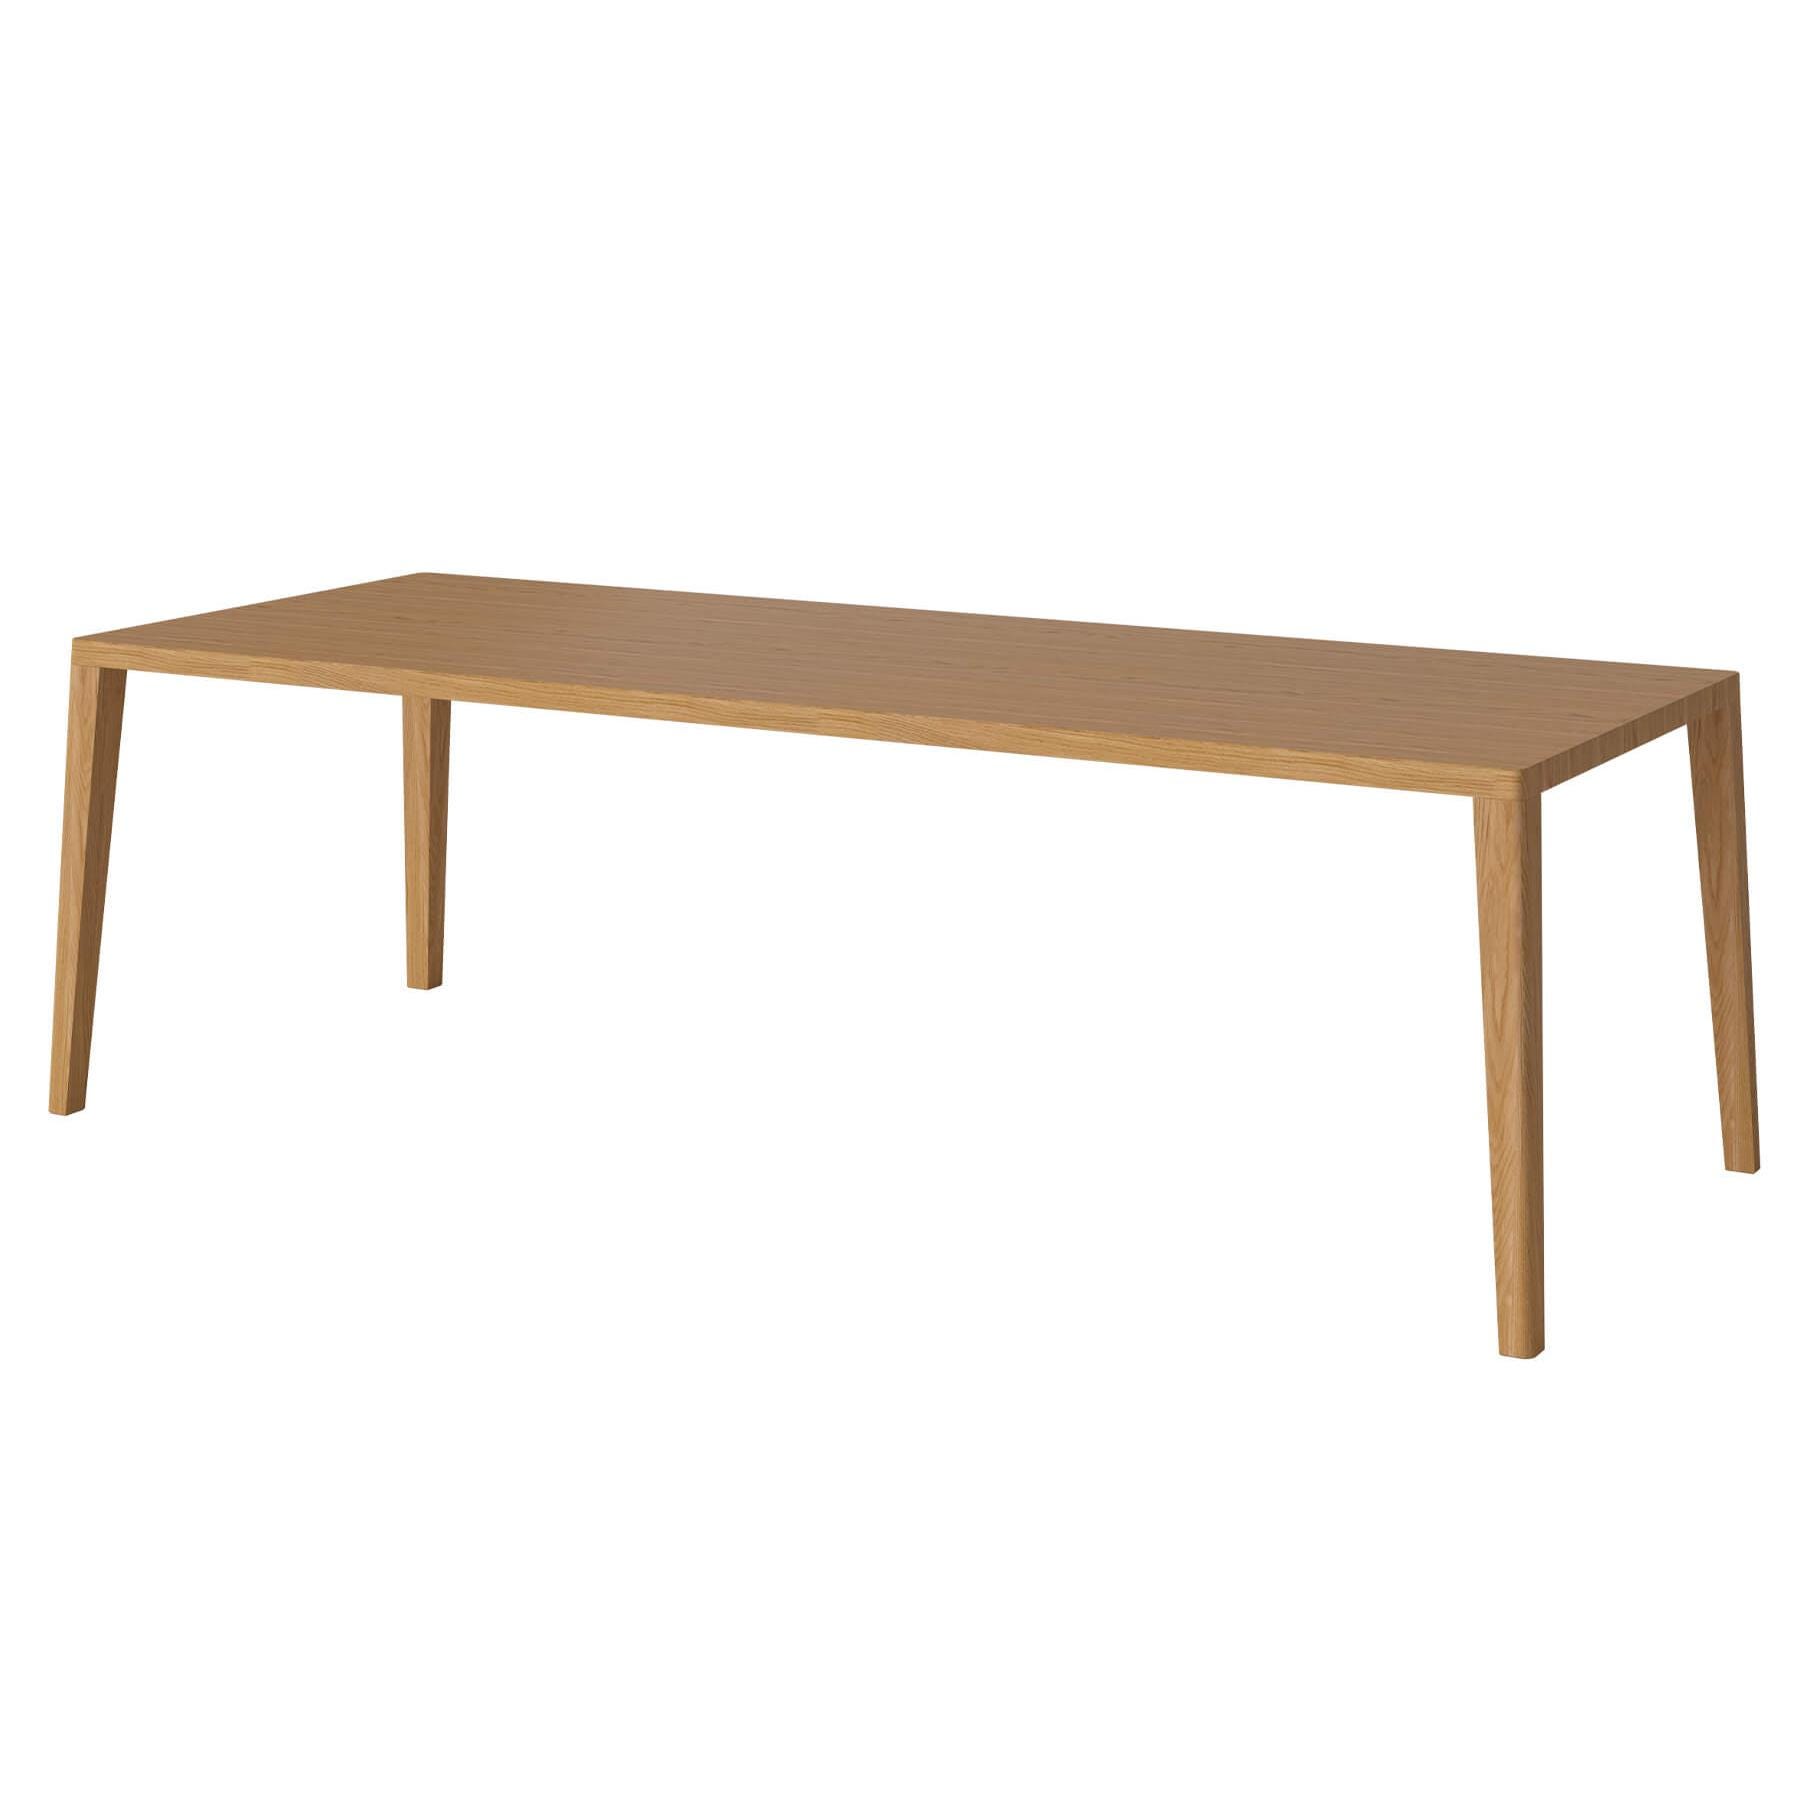 Bolia Graceful Dining Table 240 X 95cm Oiled Legs Without Extension Leaves Light Wood Designer Furniture From Holloways Of Ludlow